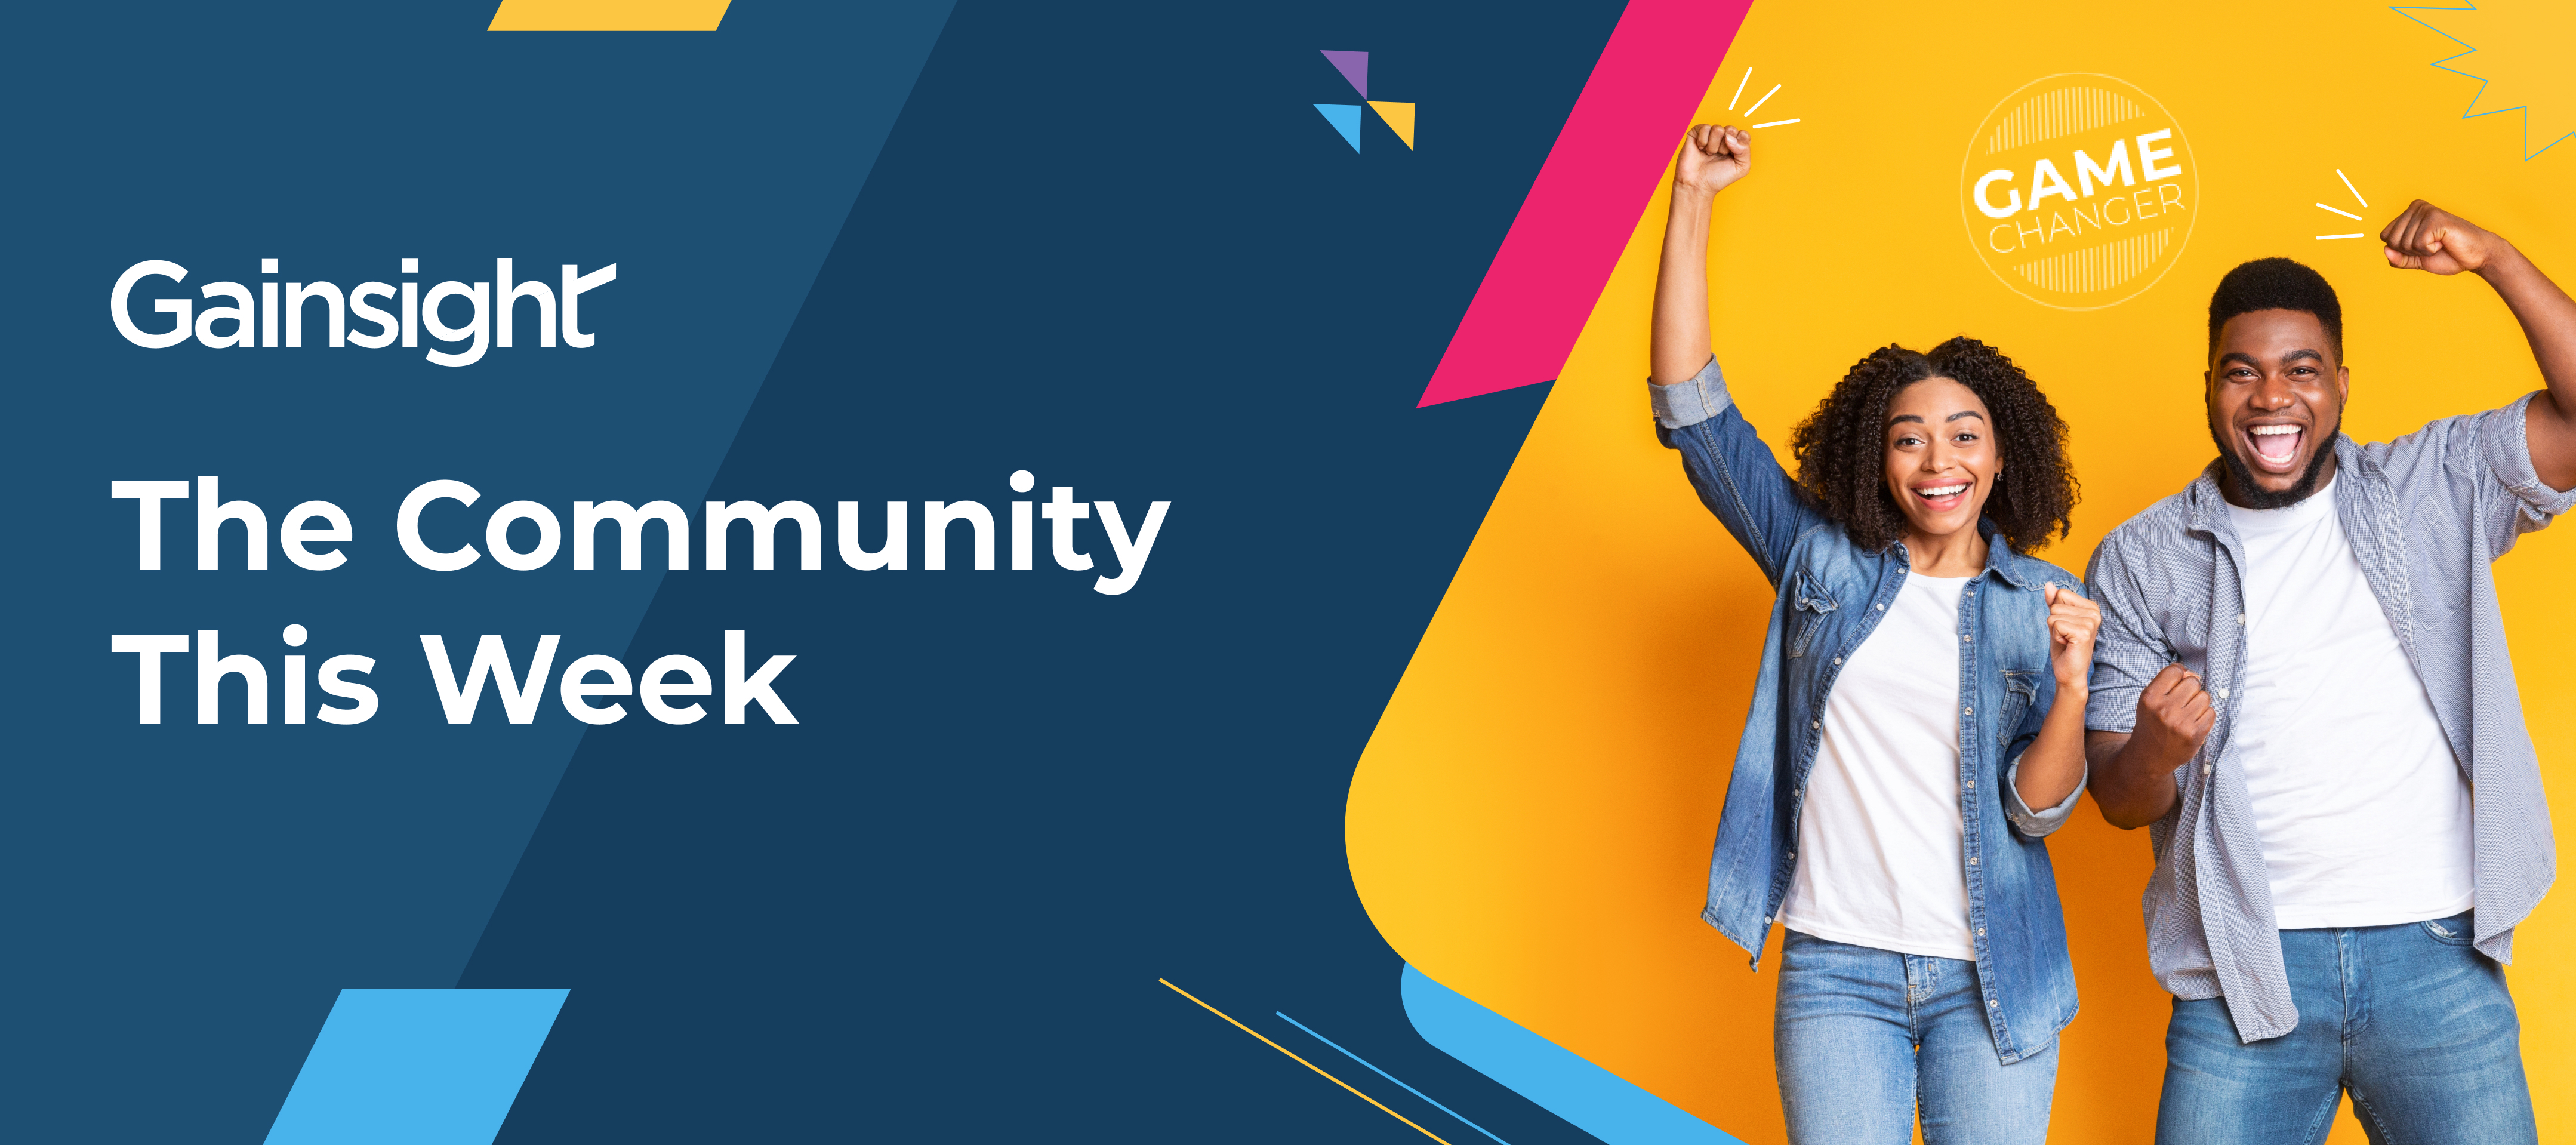 The Community This Week: GameChanger to become One Community for all Gainsight products